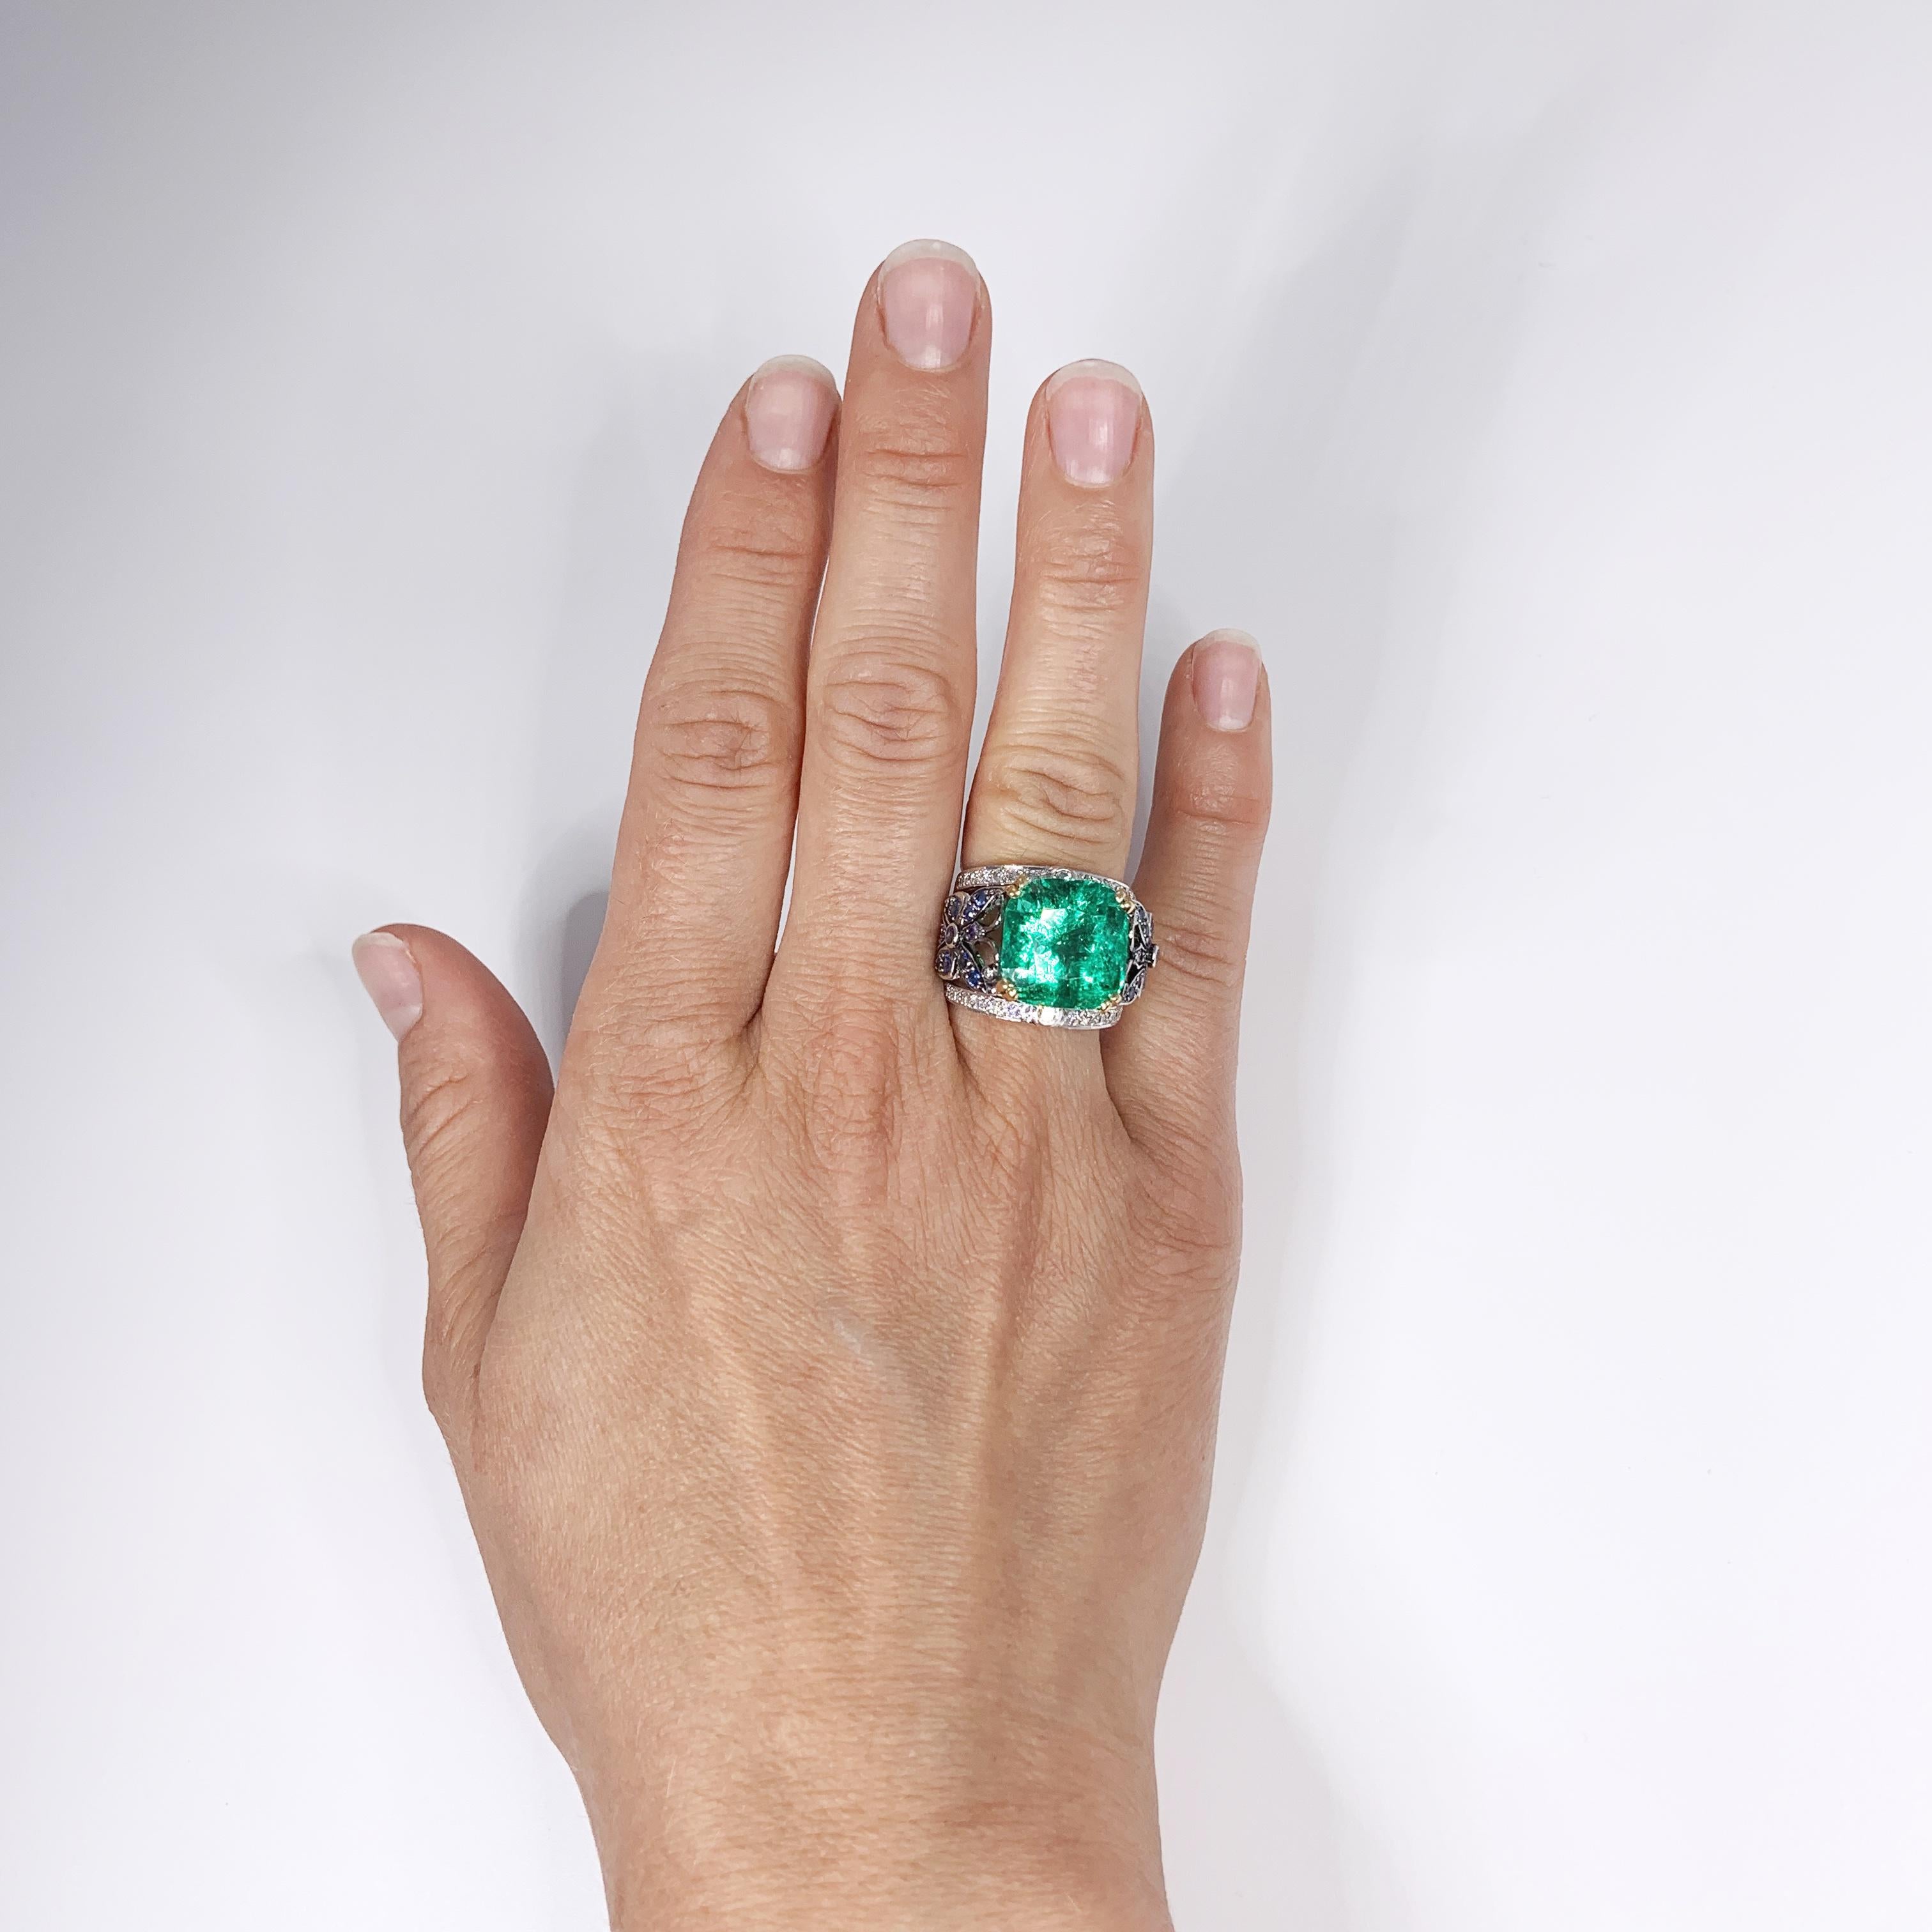 Women's 11.5 Carat Colombian Emerald, Sapphires, Diamond Gold Embroidery Ring by Édéenne For Sale